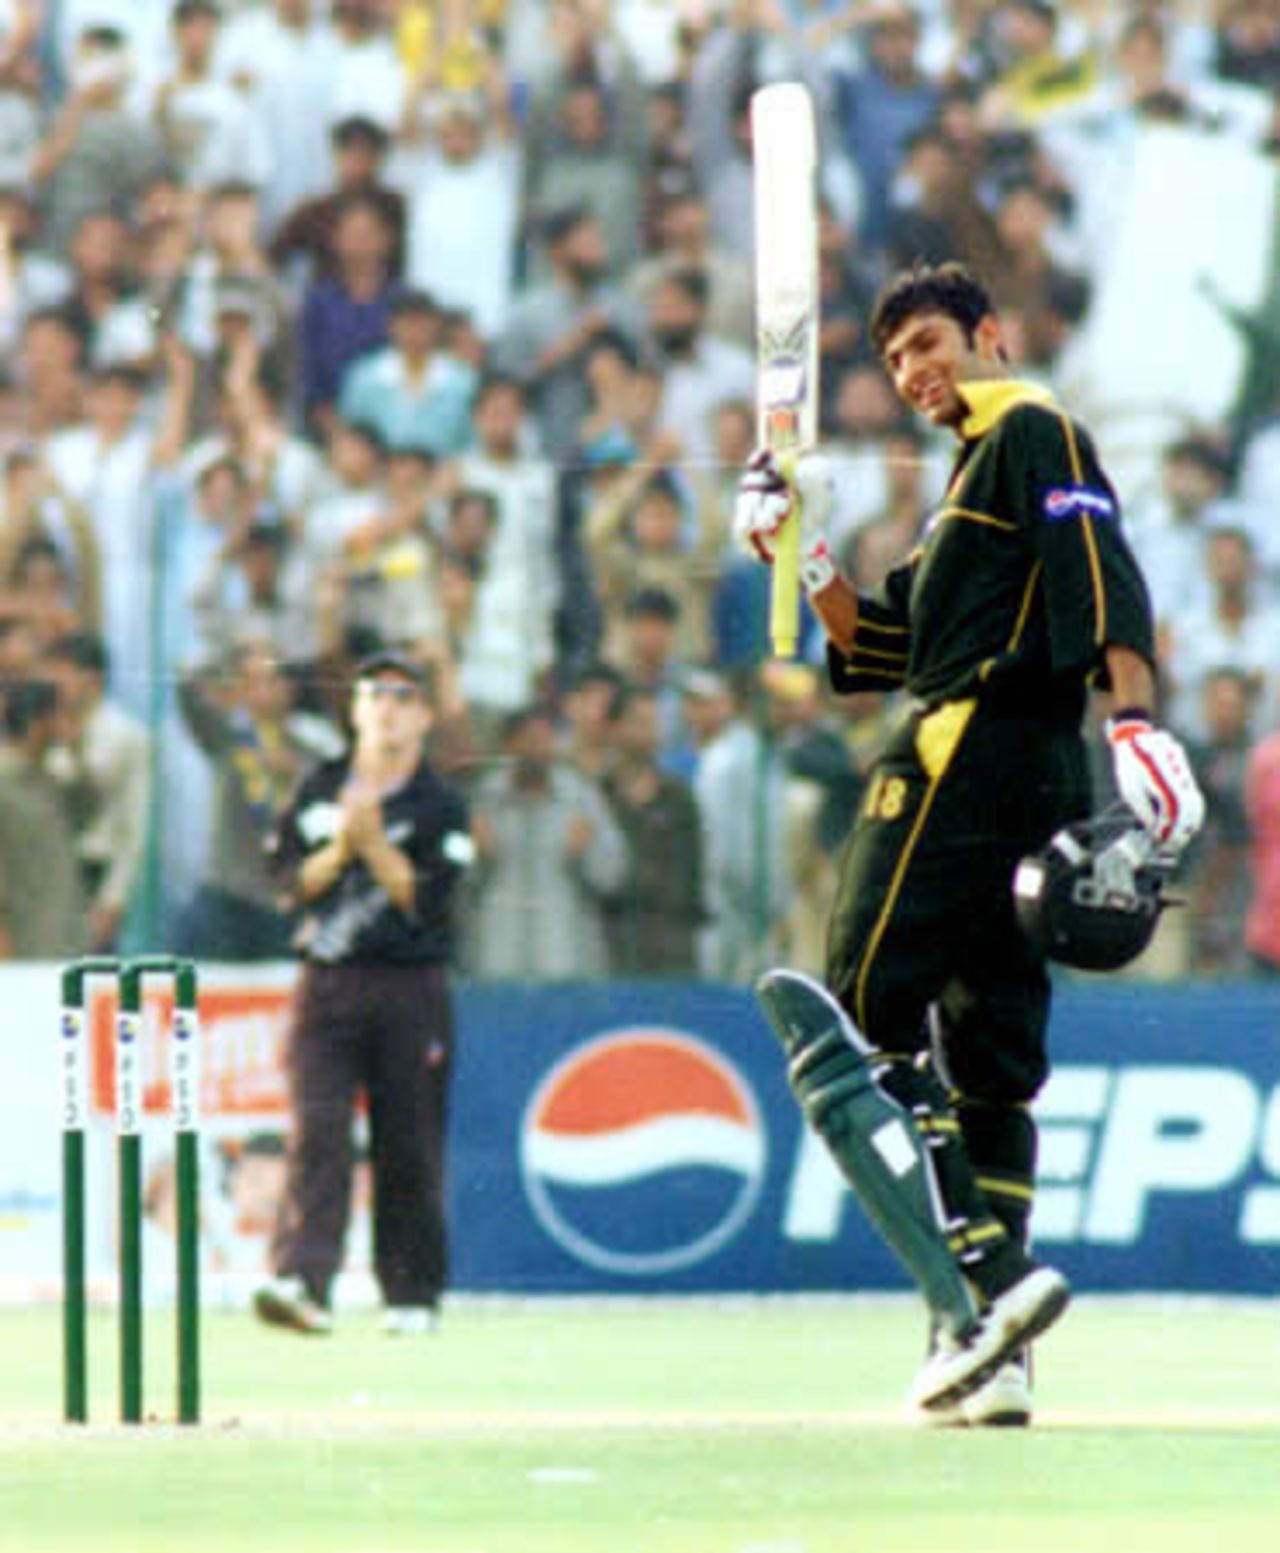 Shoaib Malik acknowledges the cheers after his 100 - 3rd ODI at Lahore, New Zealand v Pakistan, 27 Apr 2002